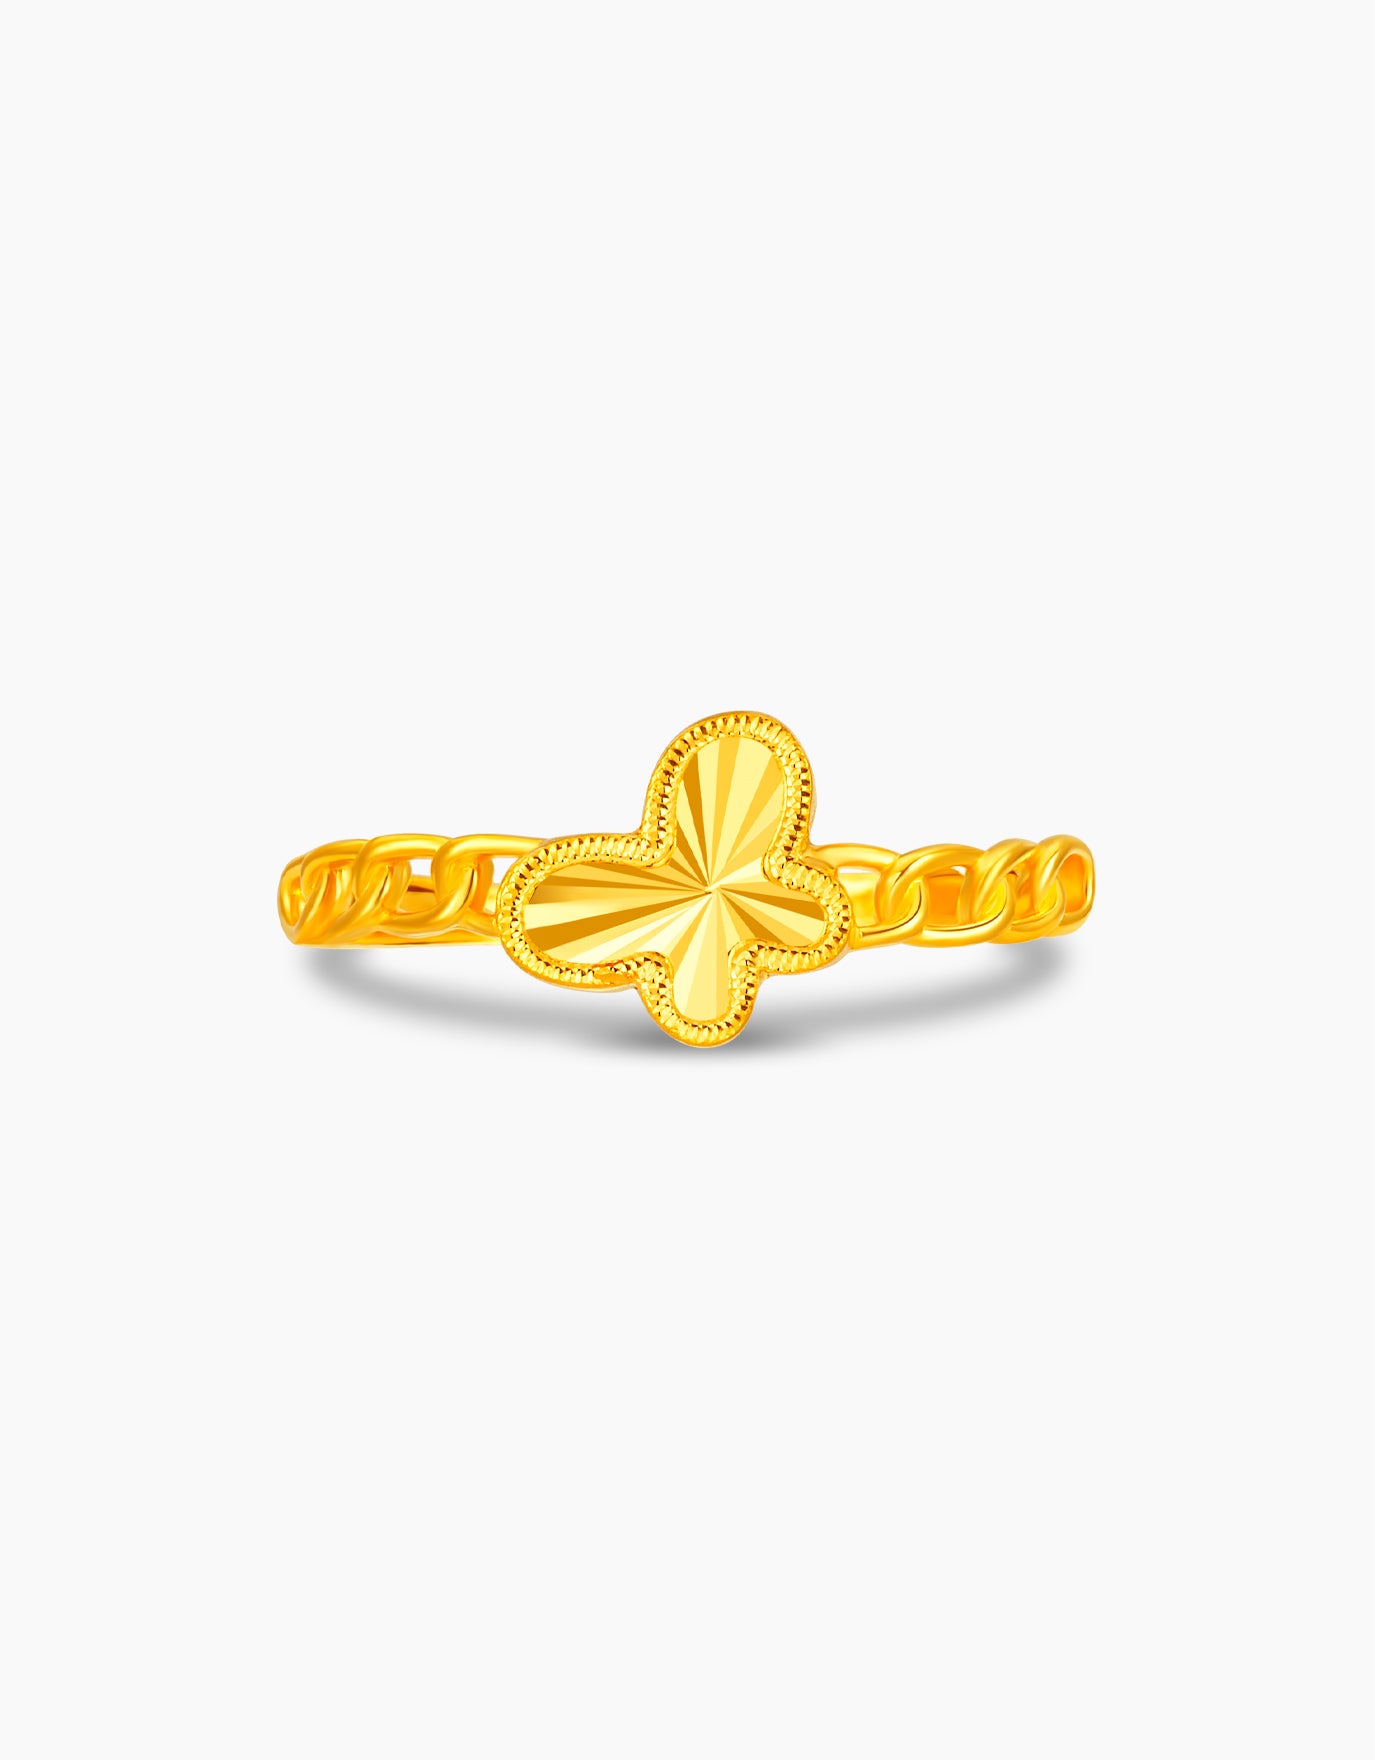 LVC 9IN Braided Butterfly 999 Gold Ring